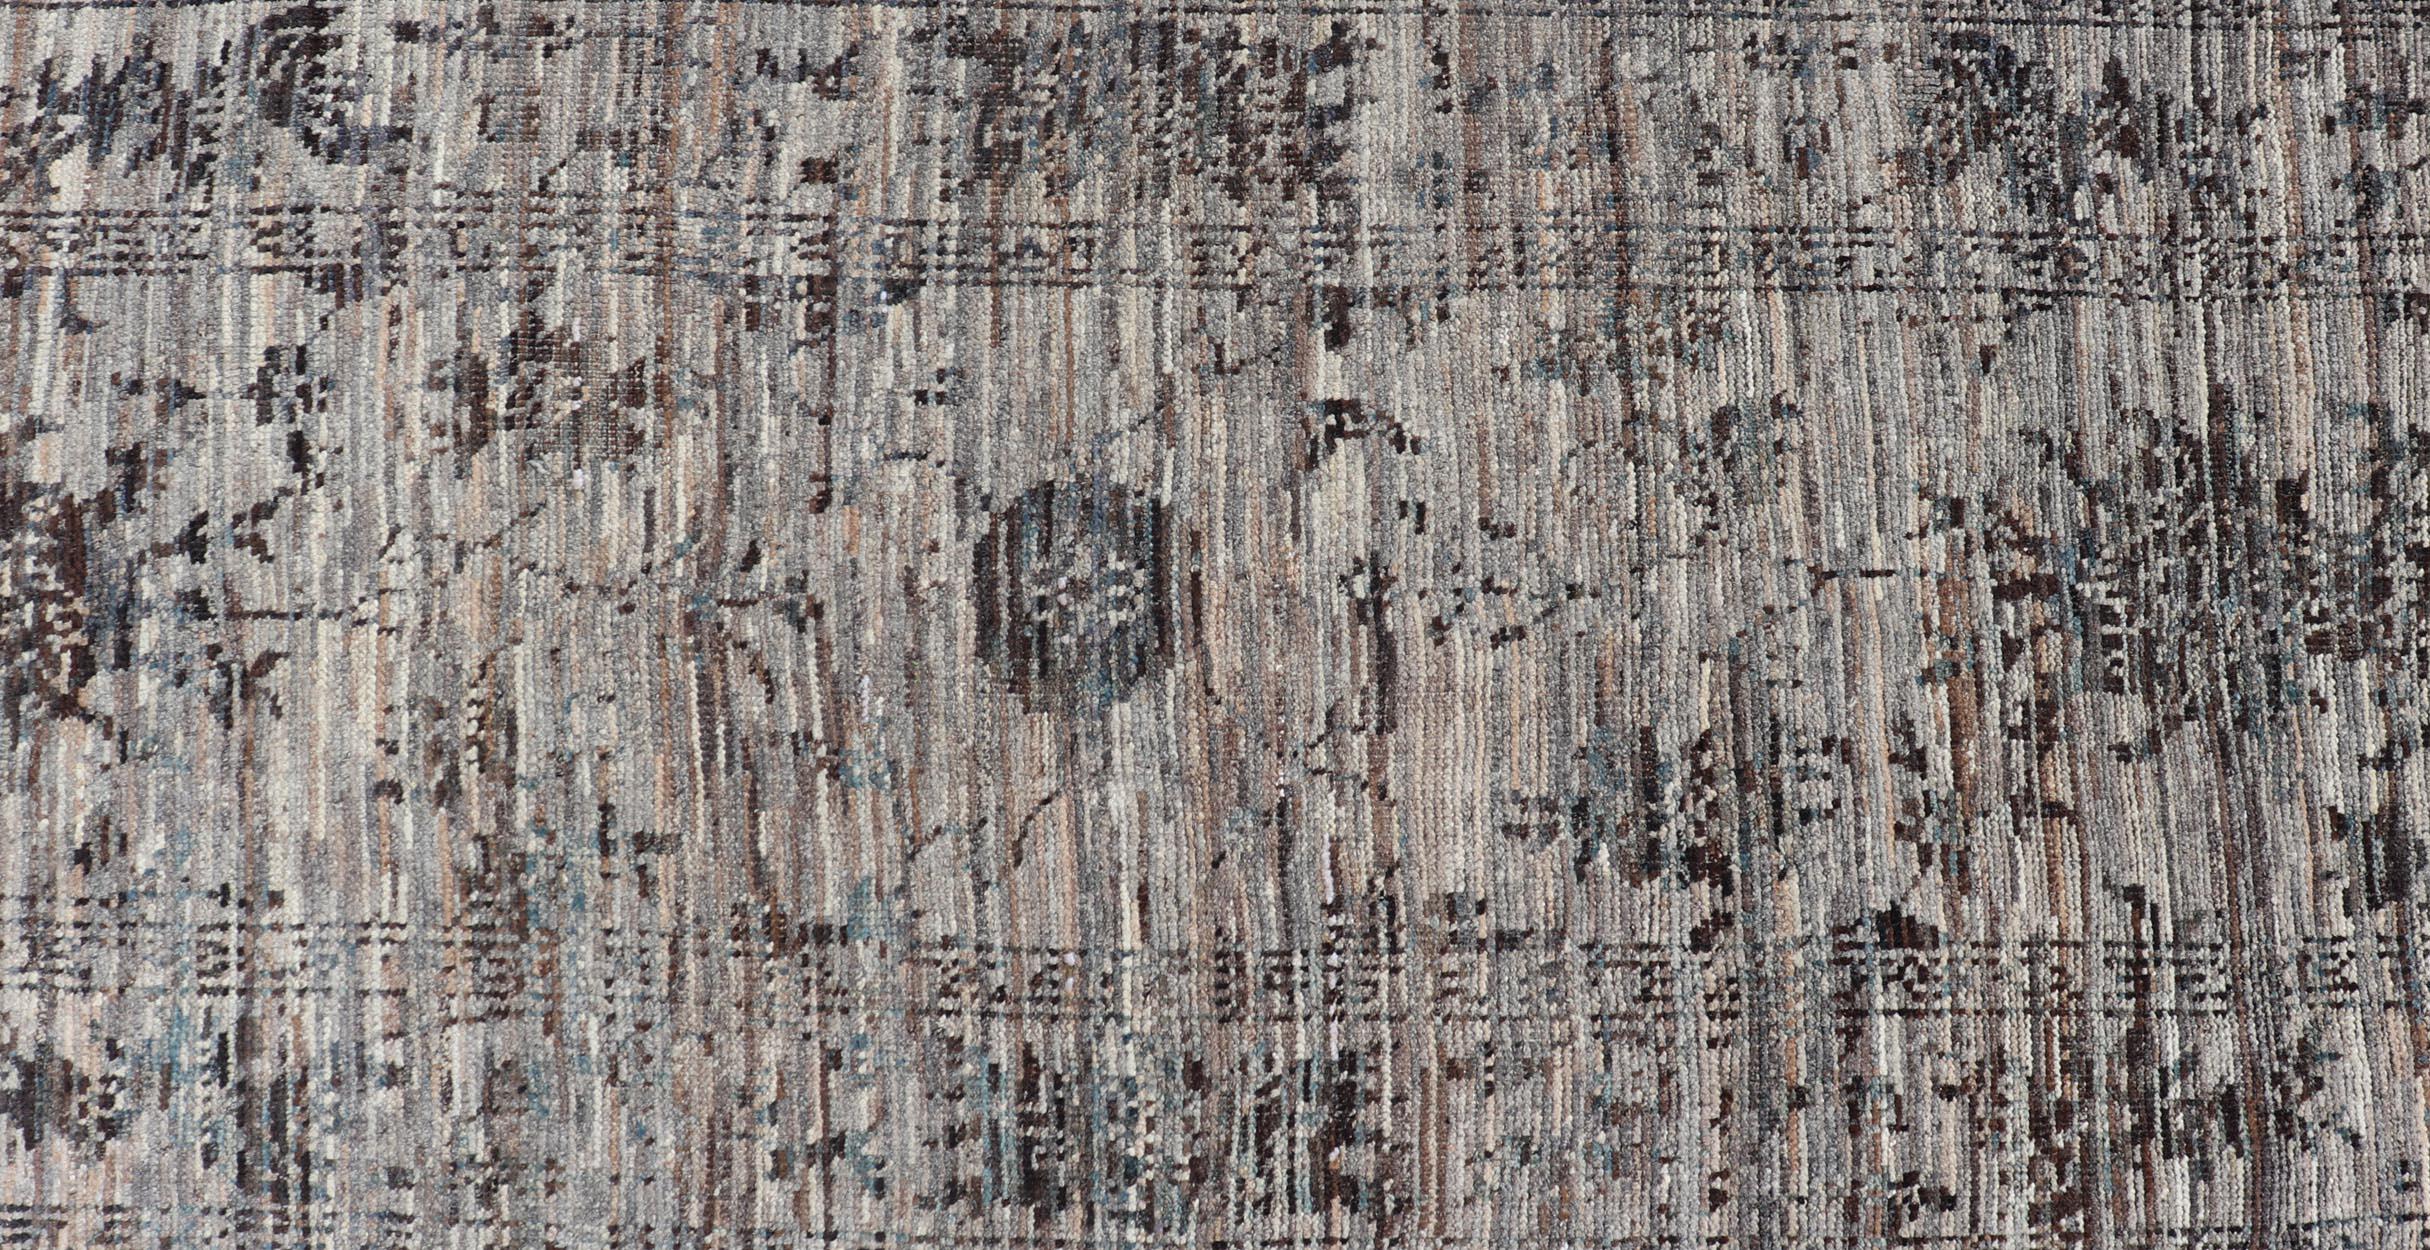 This modern casual tribal runner has been hand-knotted in wool. The runner features a modern sub-geometric floral design, and is enclosed within a complementary, multi-tiered border. The runner is rendered in charcoal, gray and earthy tones; making